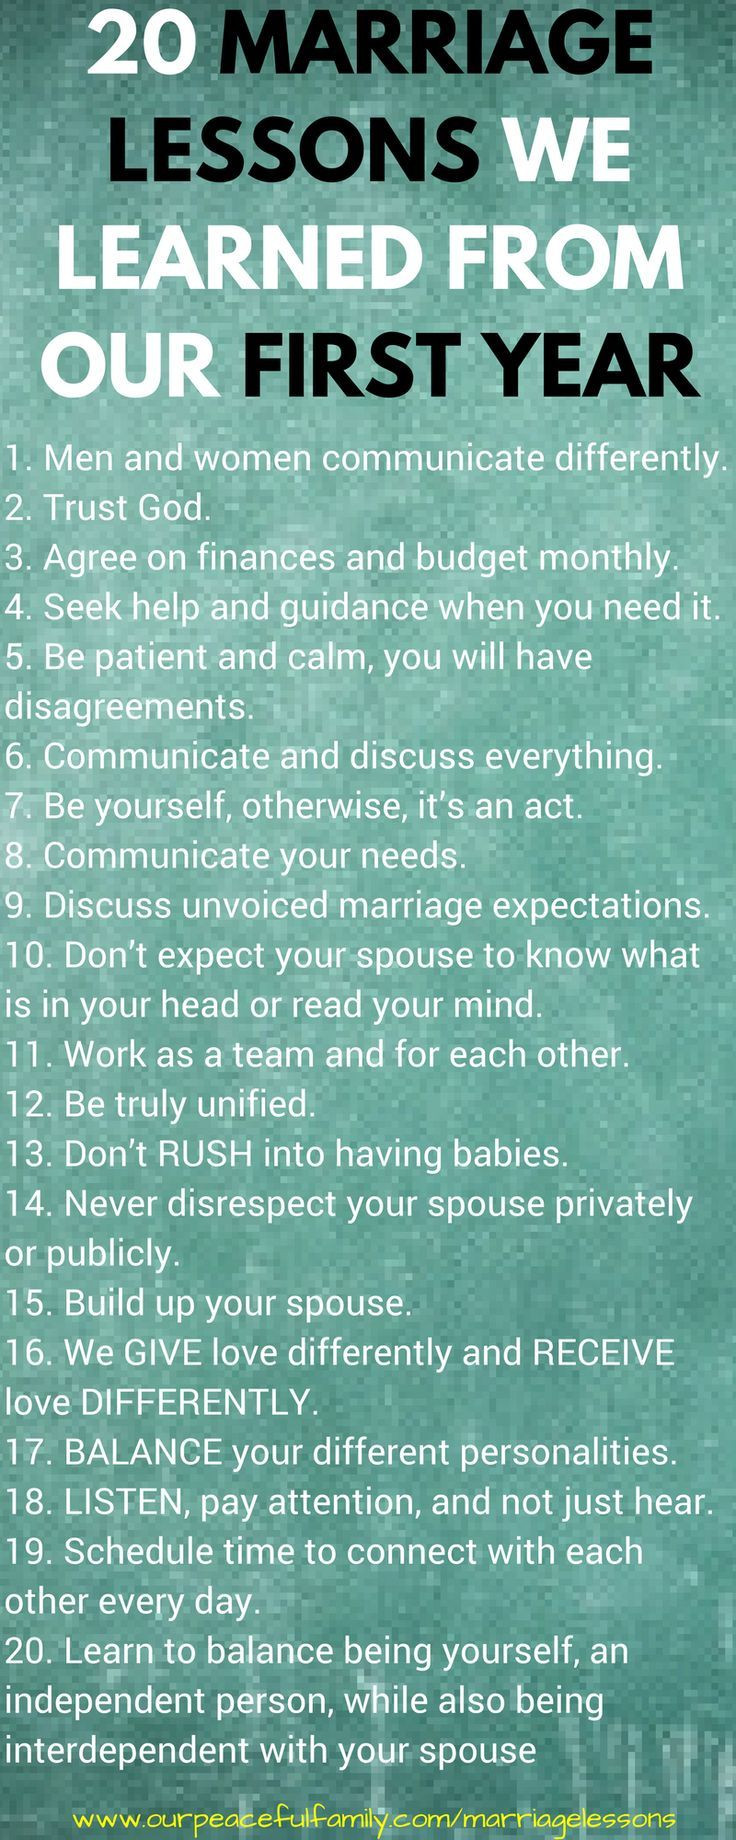 Quotes For Marriages
 20 Marriage Lessons We Learned From Our First Year of